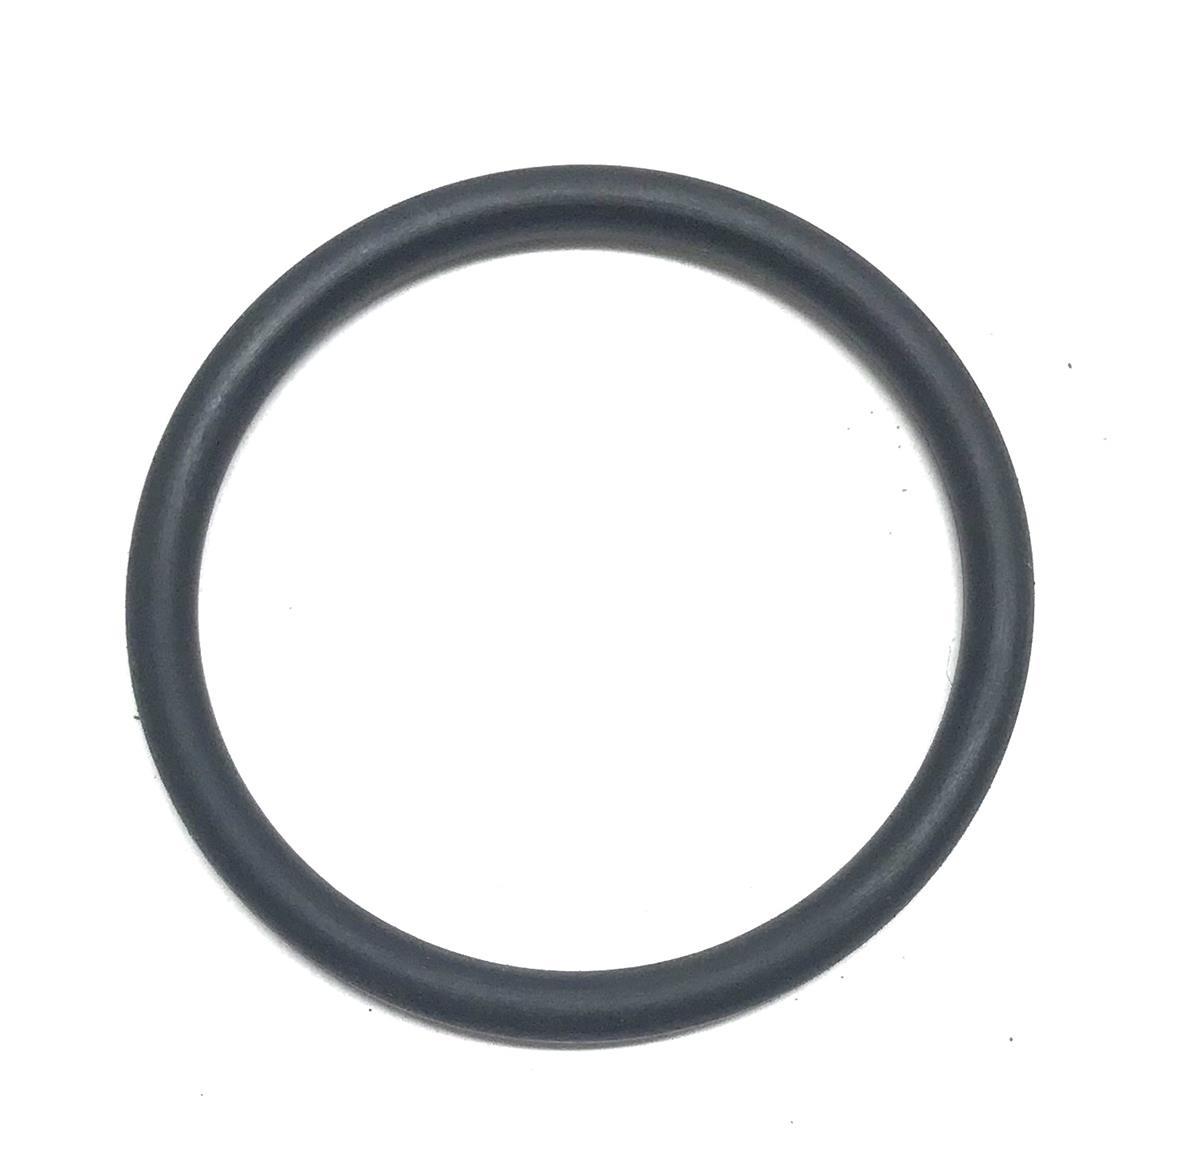 HM-1425 | HM-1425 1.5 in O Ring for Slave Receptacle and Cable Assemblies, HMMWV (1).jpg